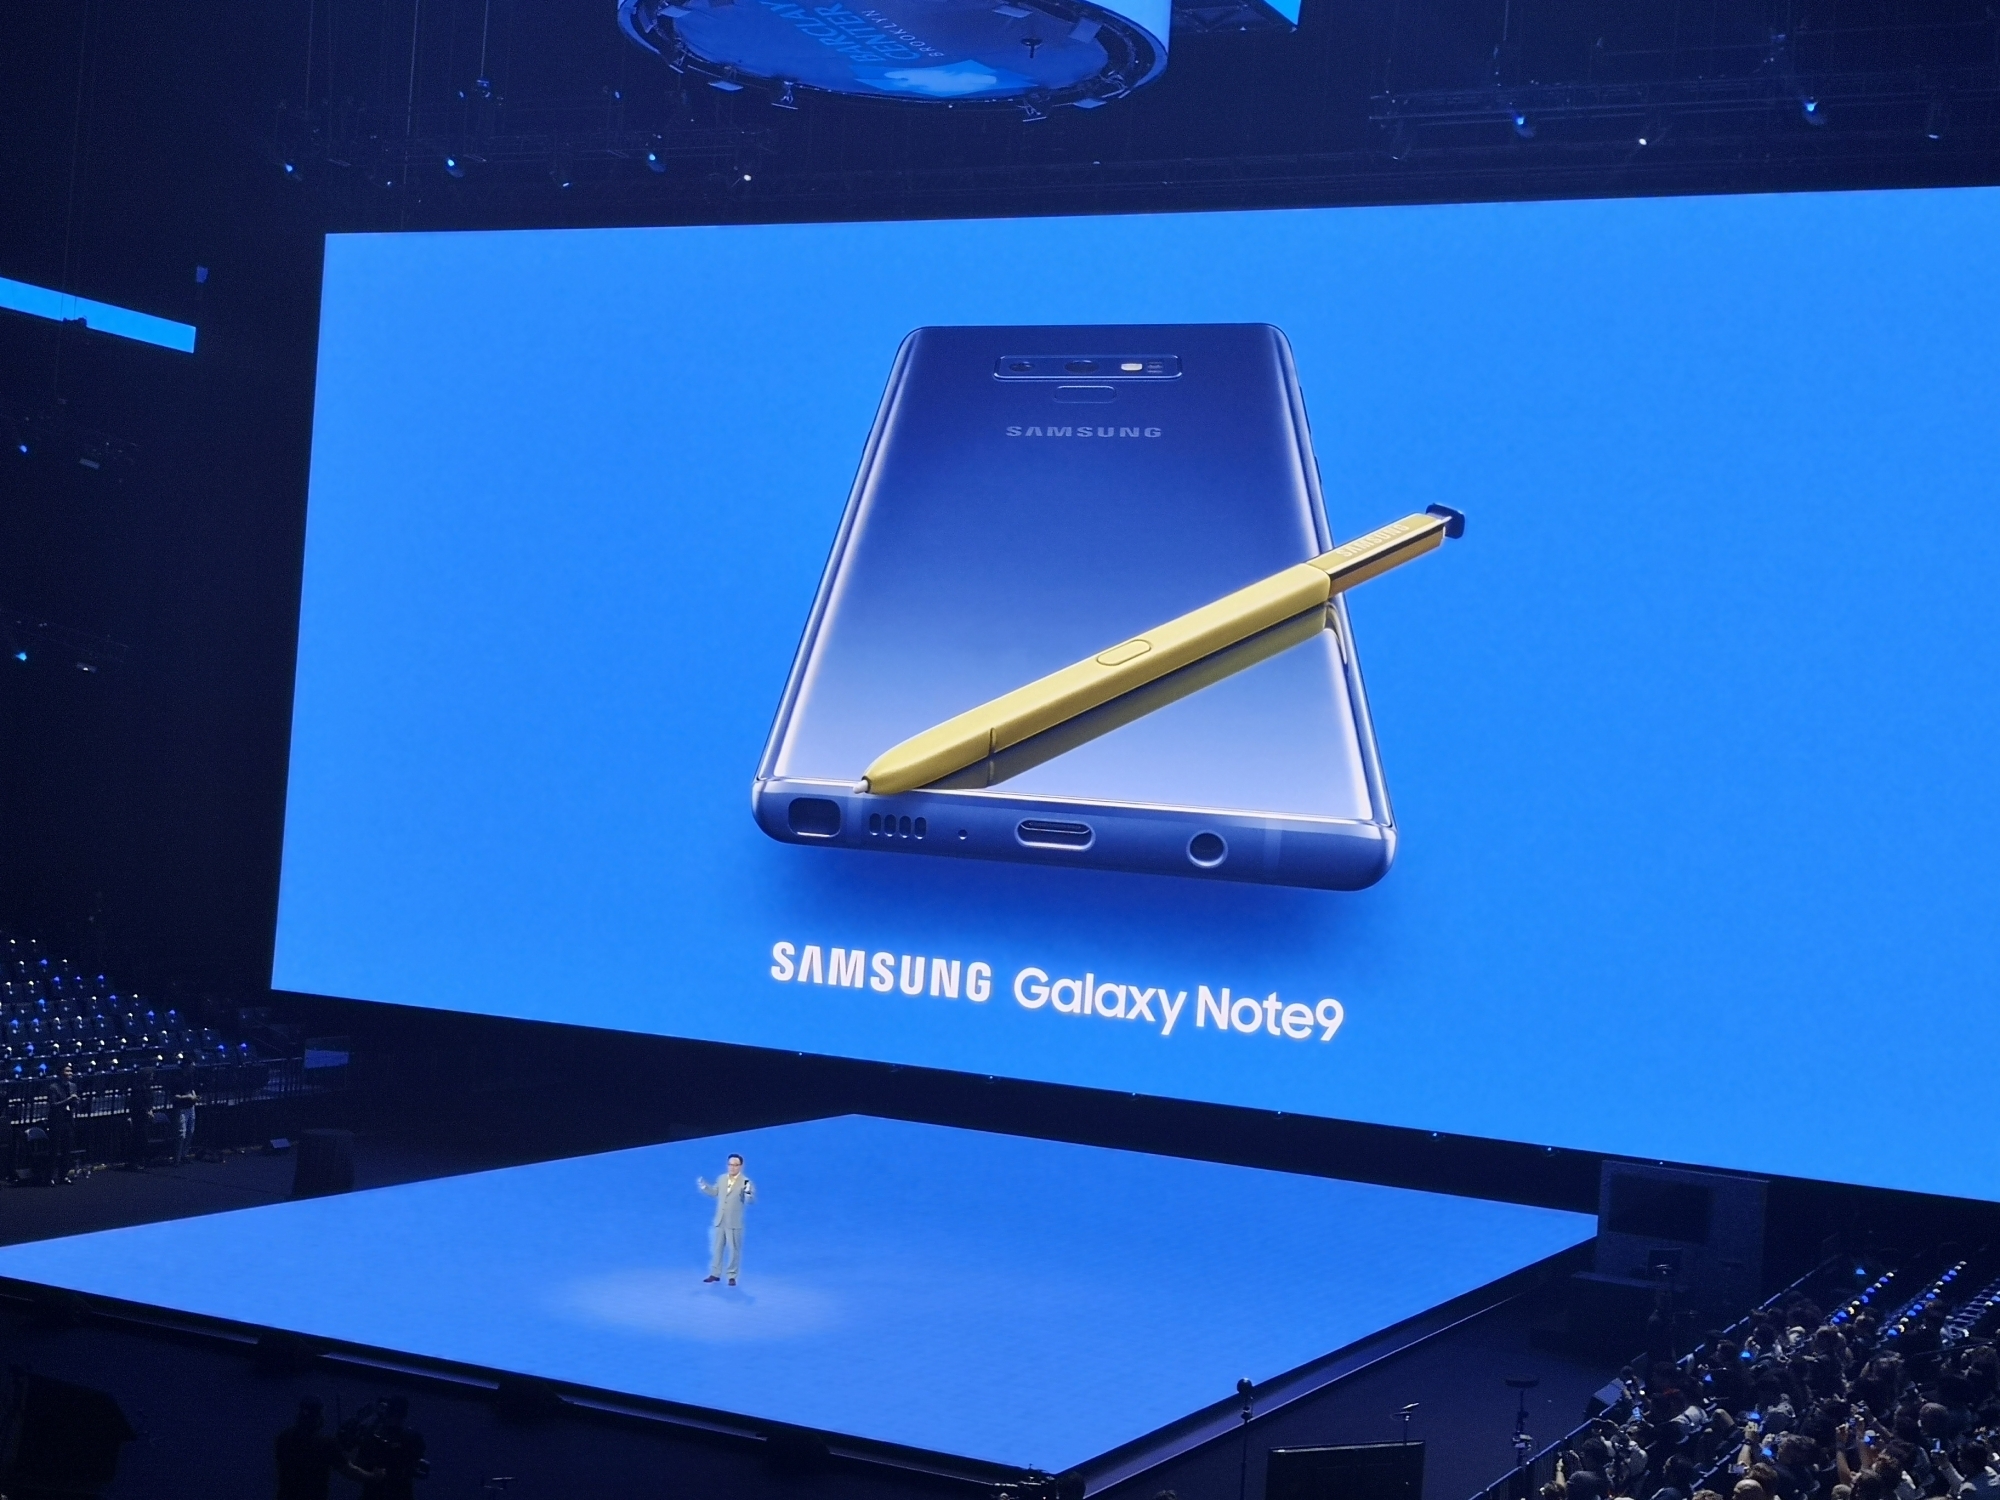 Samsung Galaxy Note 9 creates flutters in Apple's camp